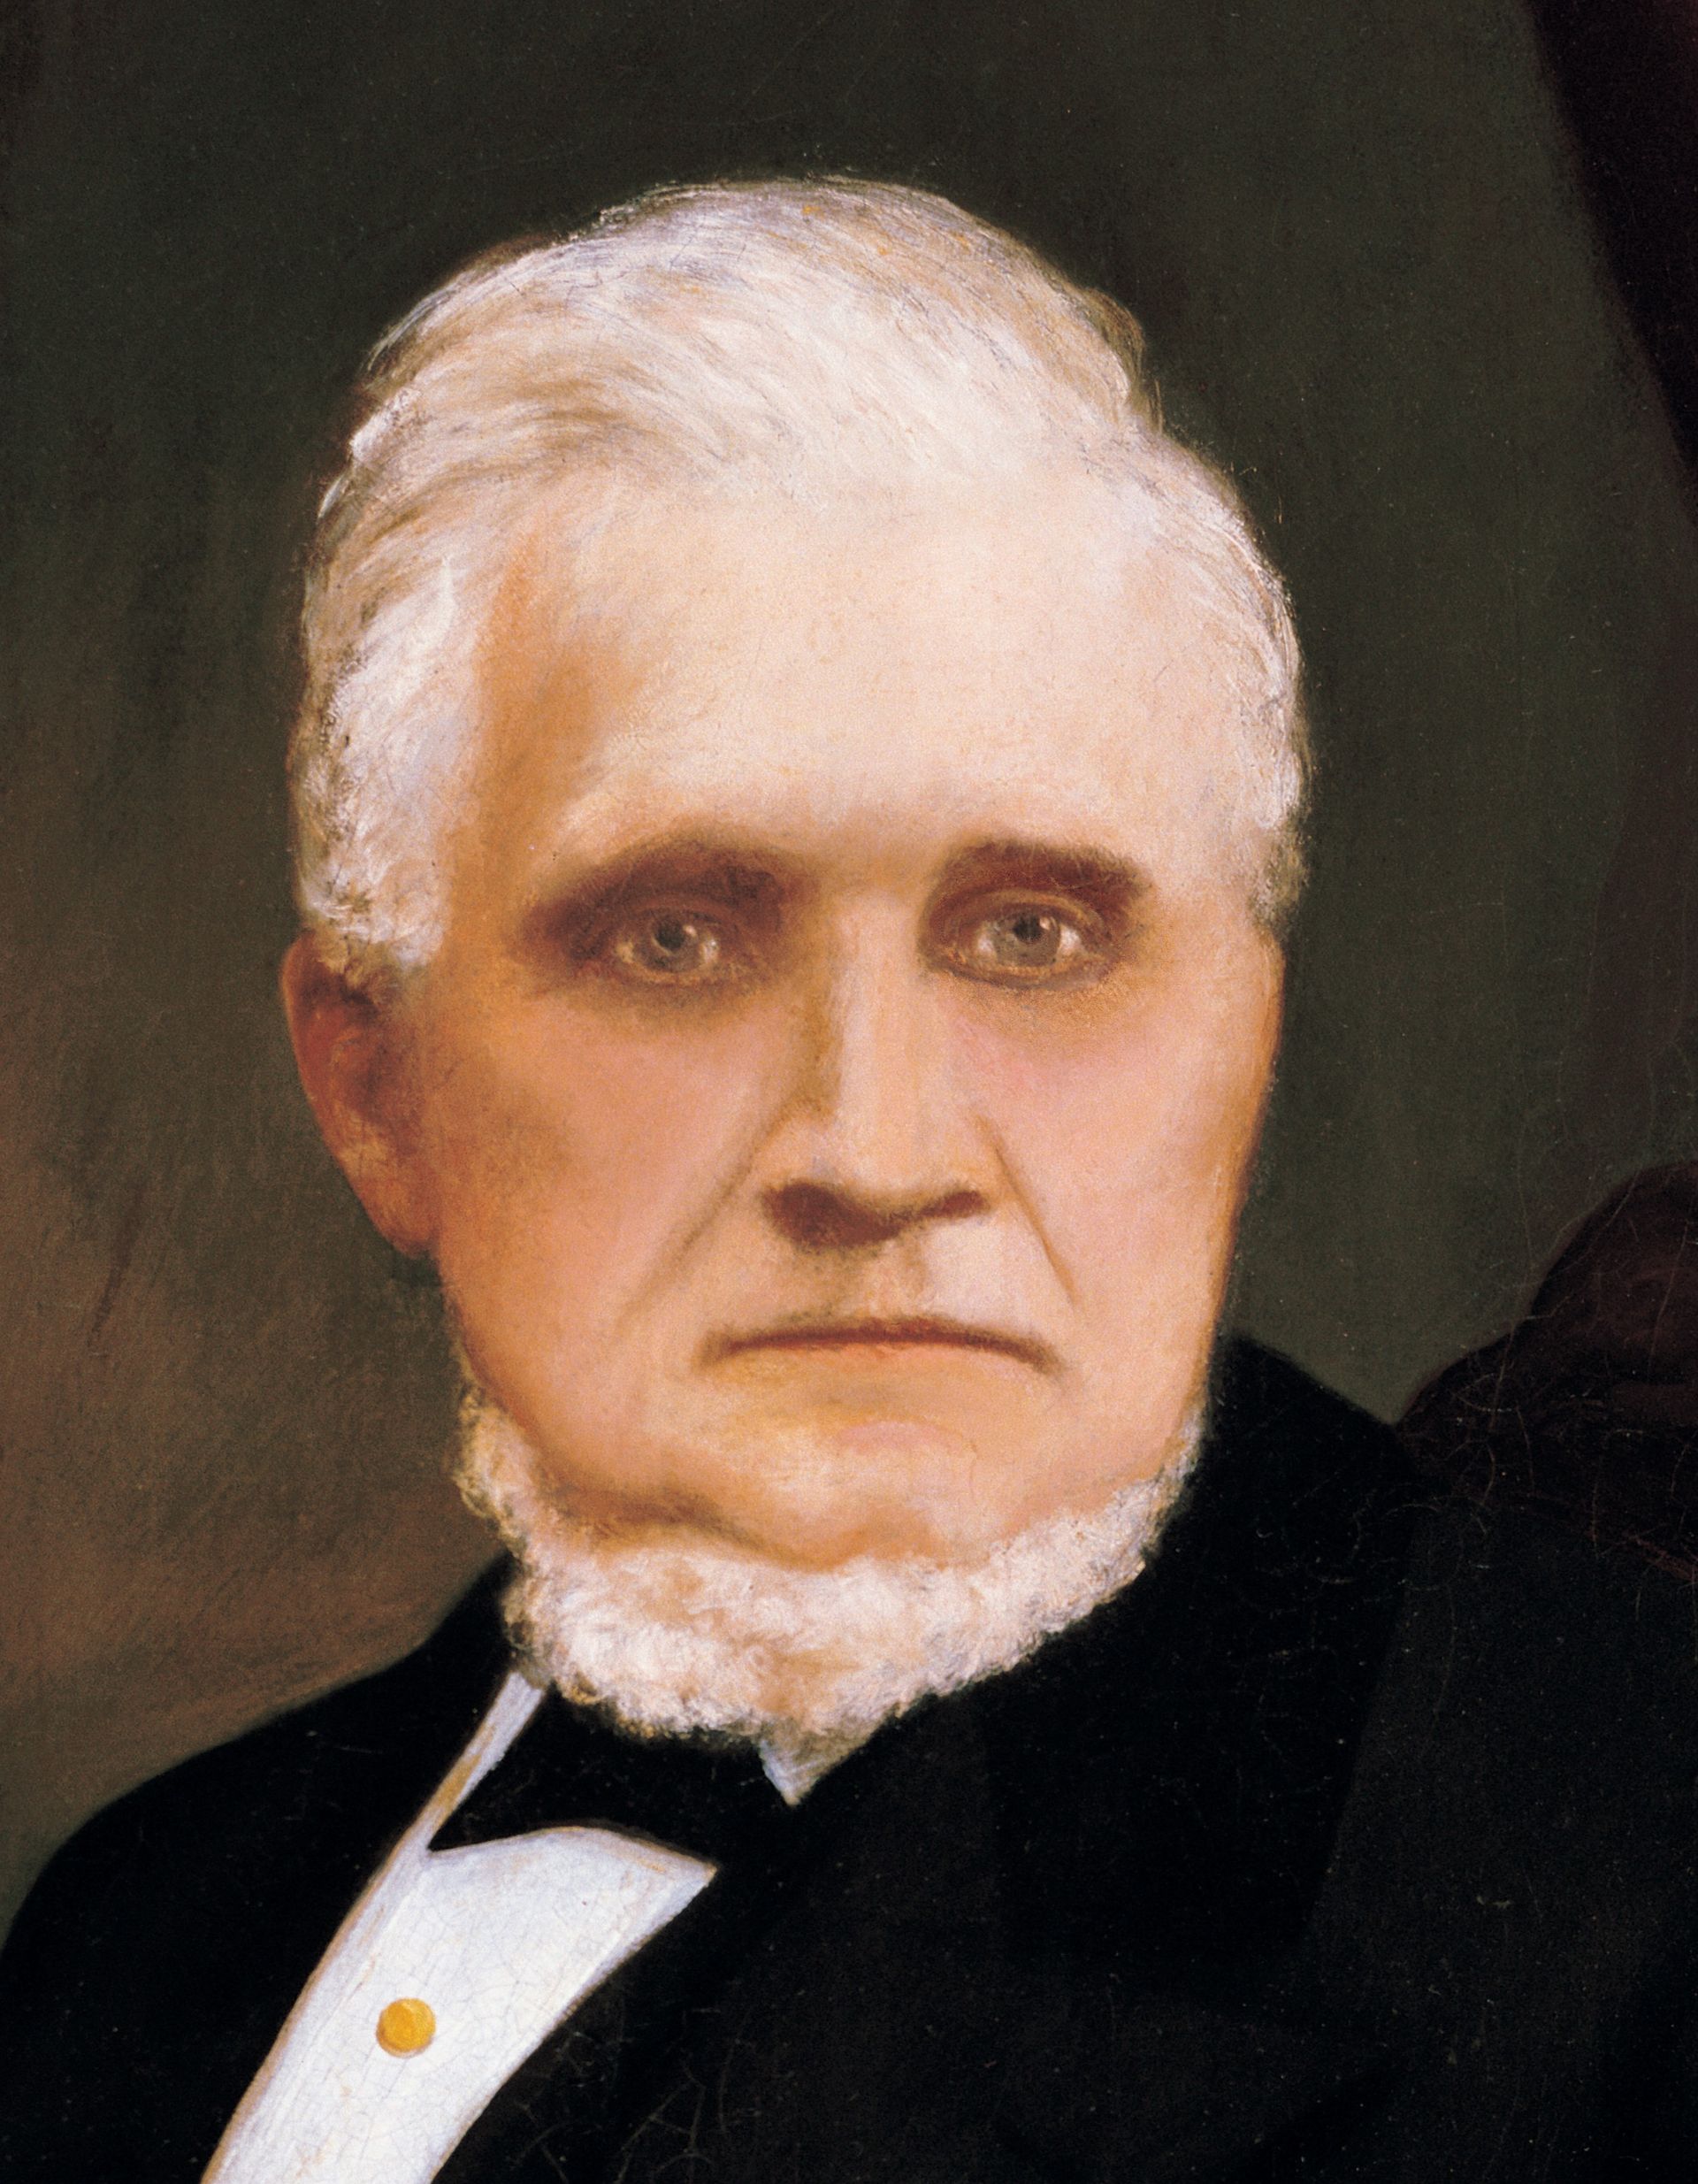 Detail from John Taylor, by A. Westwood; GAK 508; Our Heritage, 93–98. President John Taylor served as the third President of the Church from 1880 to 1887.